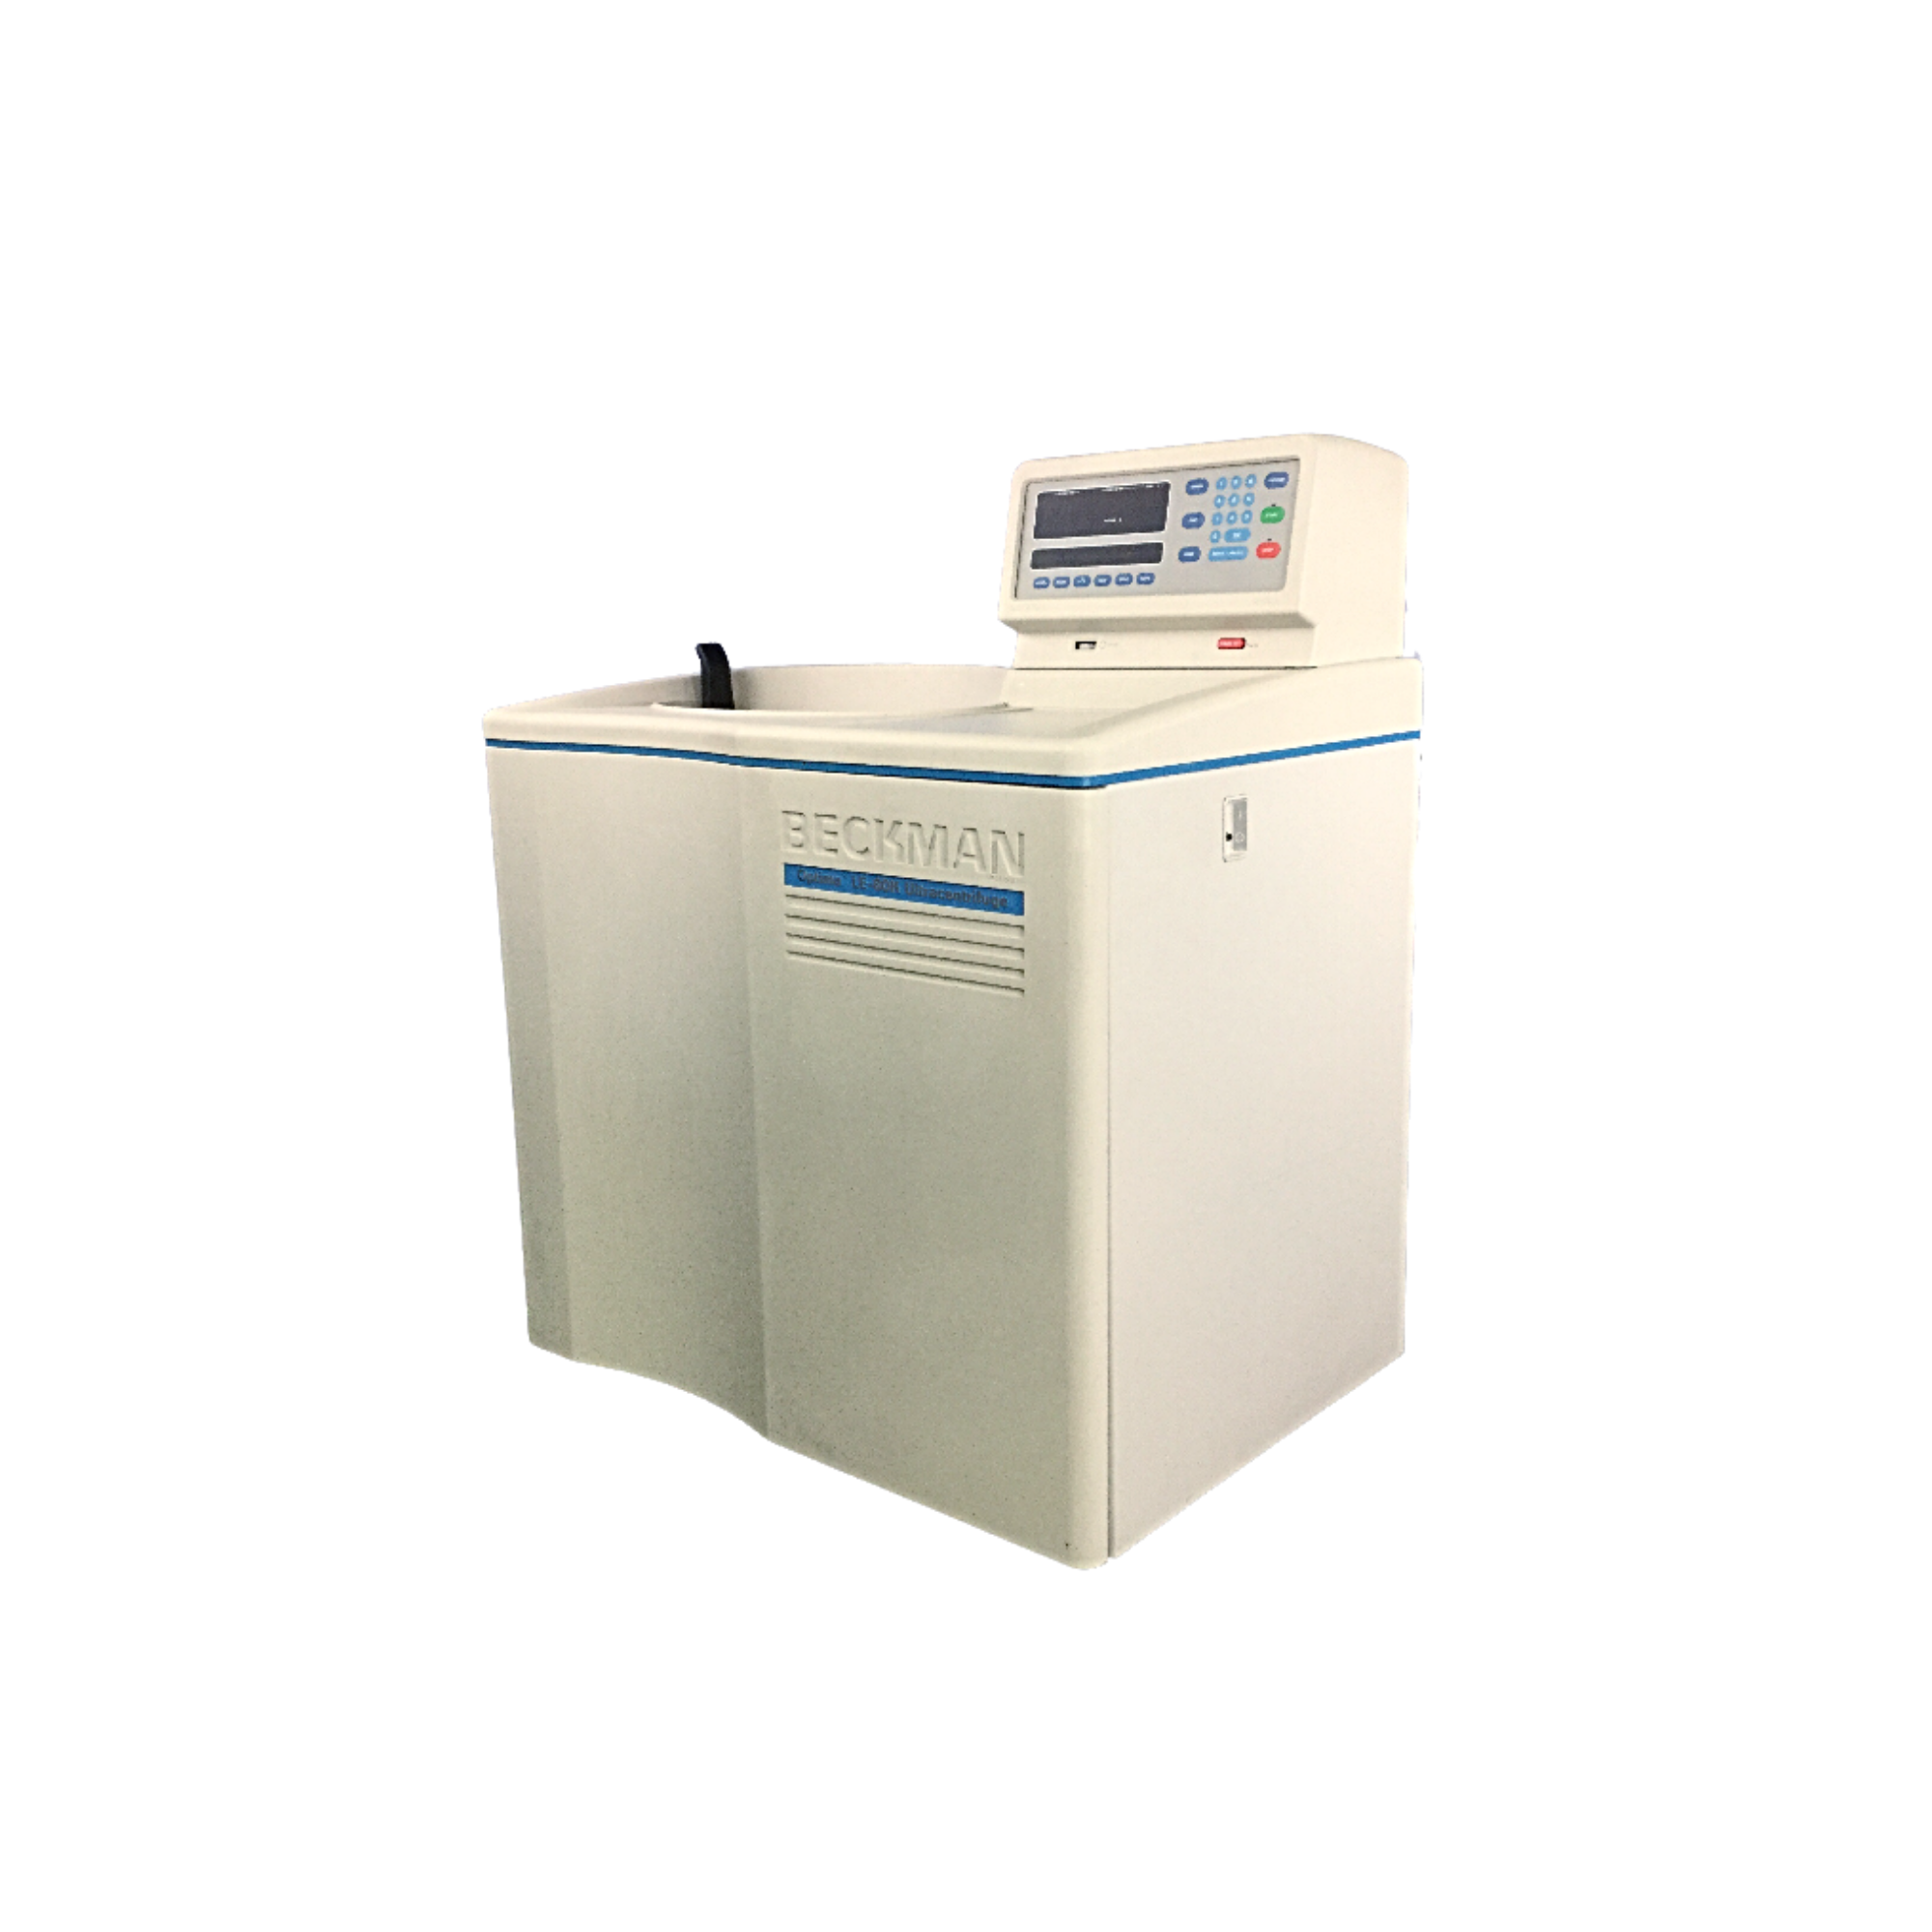 Beckman Ultracentrifuge | GMI - Trusted Laboratory Solutions